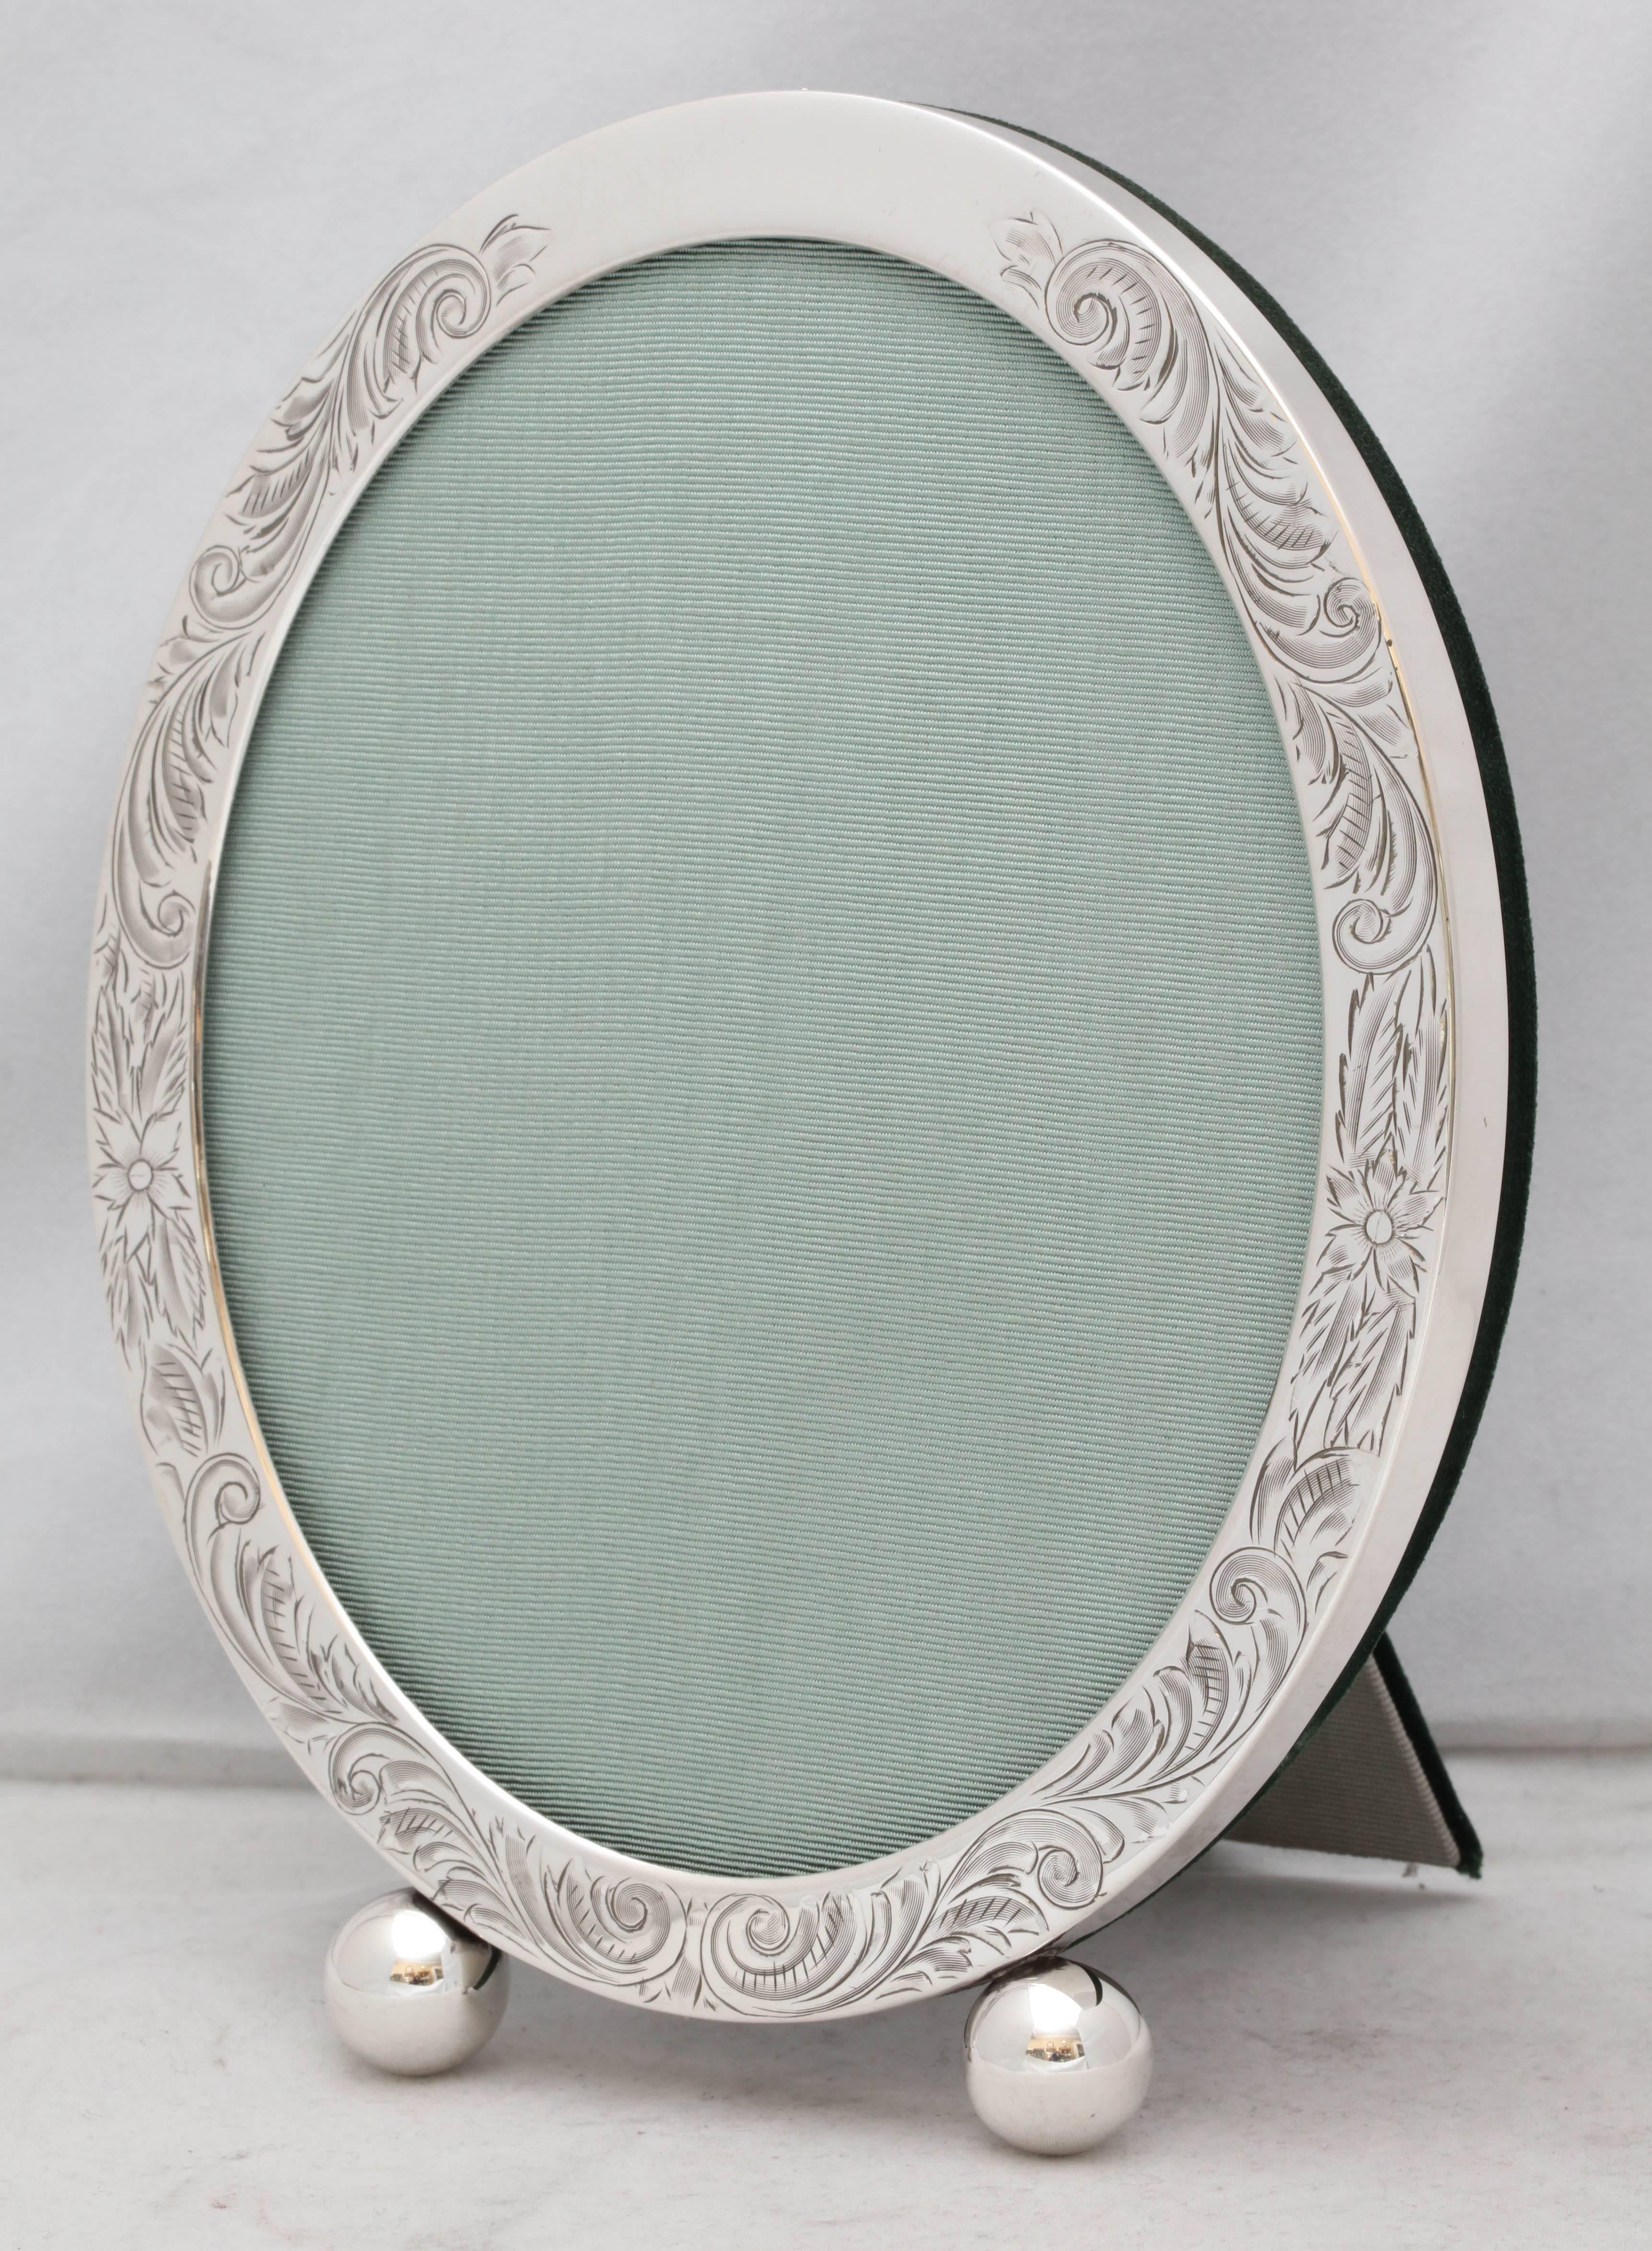 Edwardian, sterling silver, etched oval picture frame on ball feet, Unger Brothers Co., New Jersey, circa 1905. Lovely etched design. Has original convex glass. Measures: 8 inches high x 6 inches wide (at widest point) x 4 inches deep when easel is